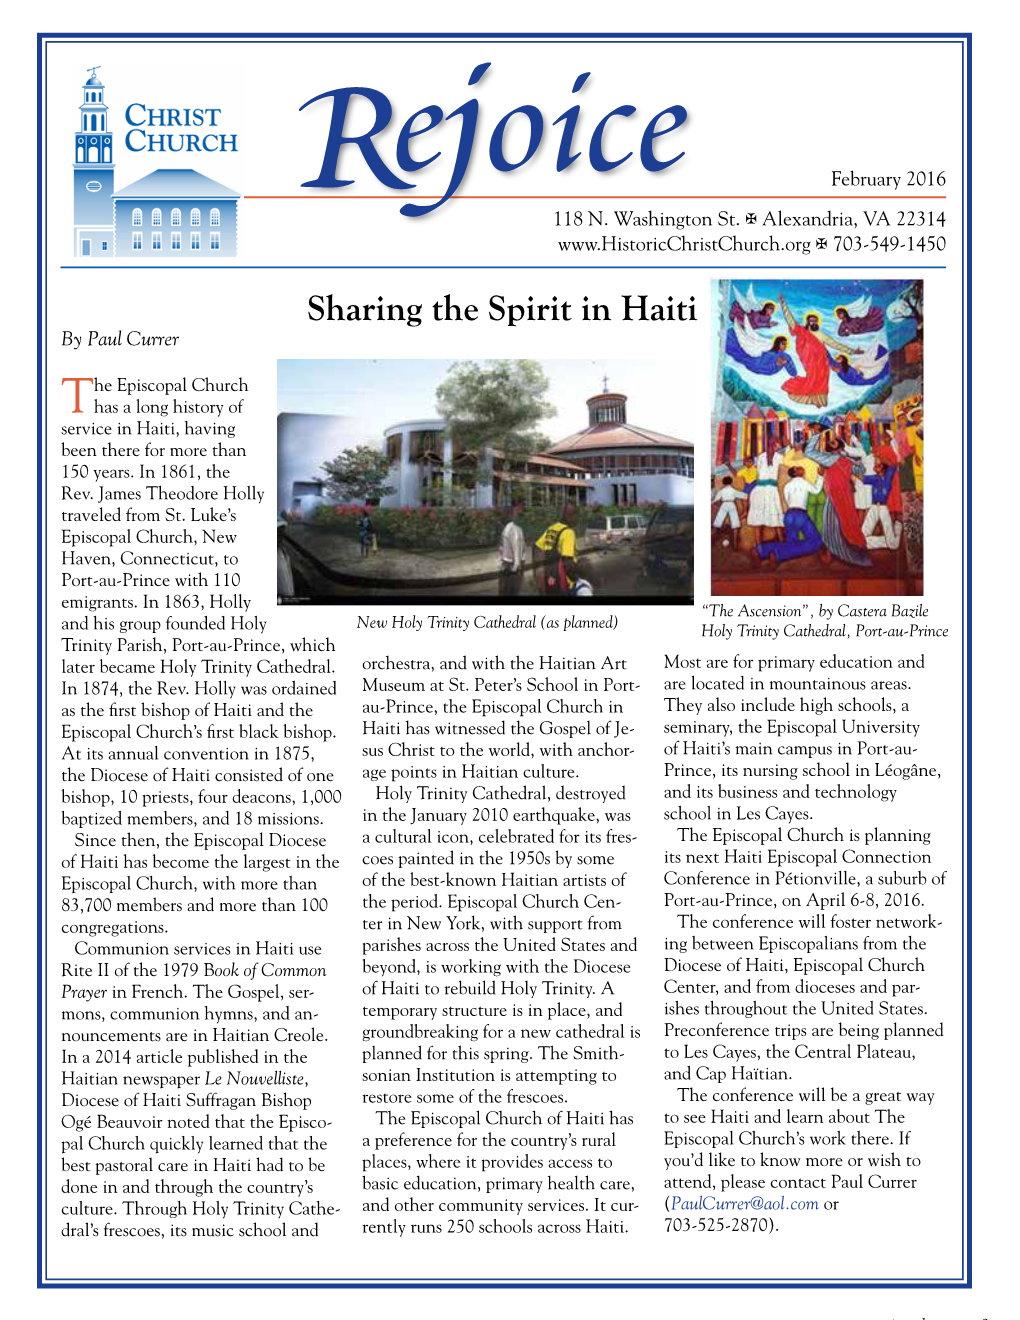 Sharing the Spirit in Haiti by Paul Currer